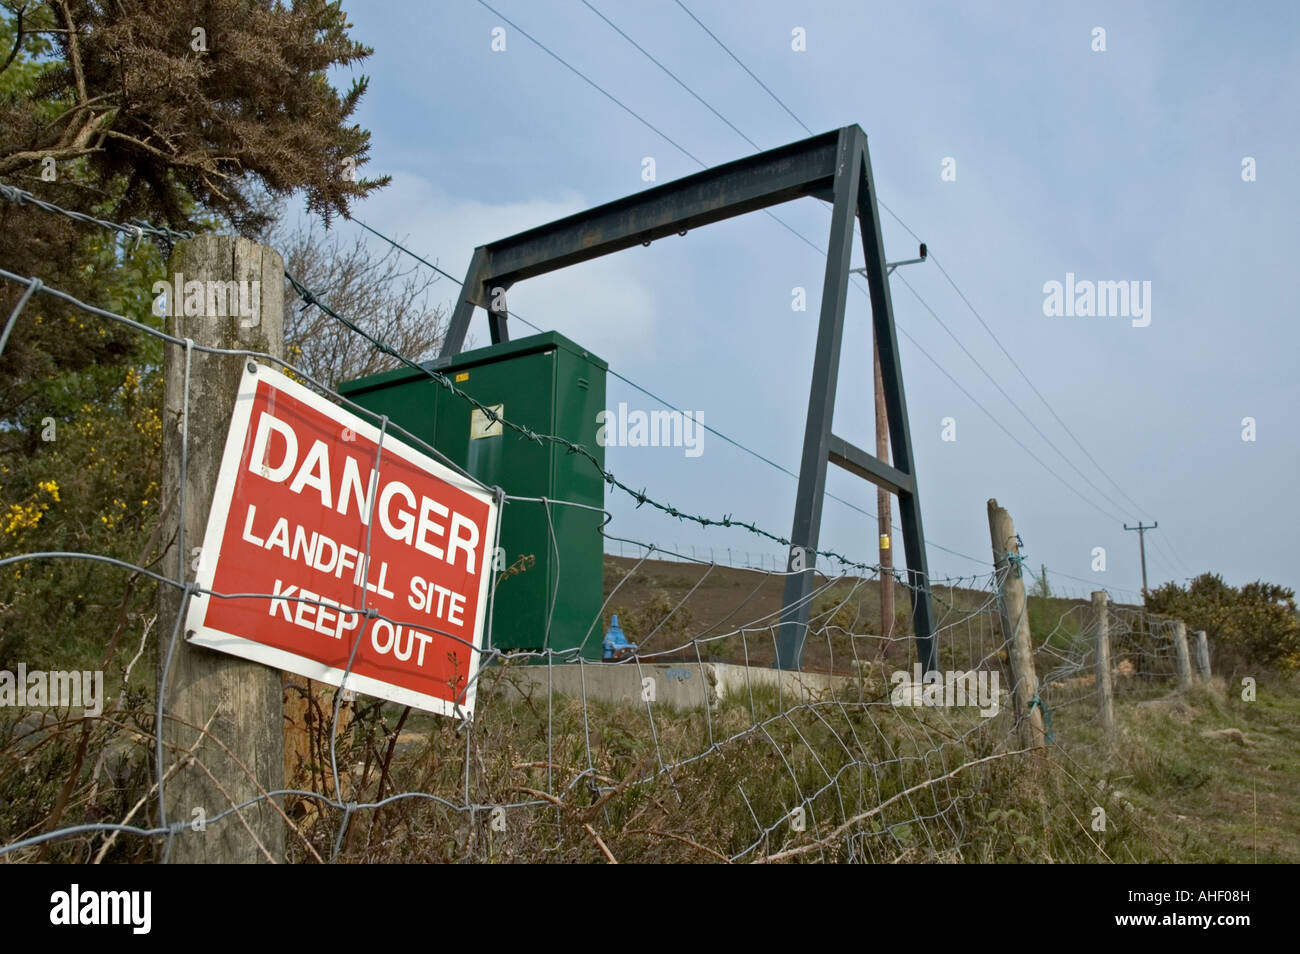 a keep out sign on a land fill site near redruth in cornwall, england Stock Photo